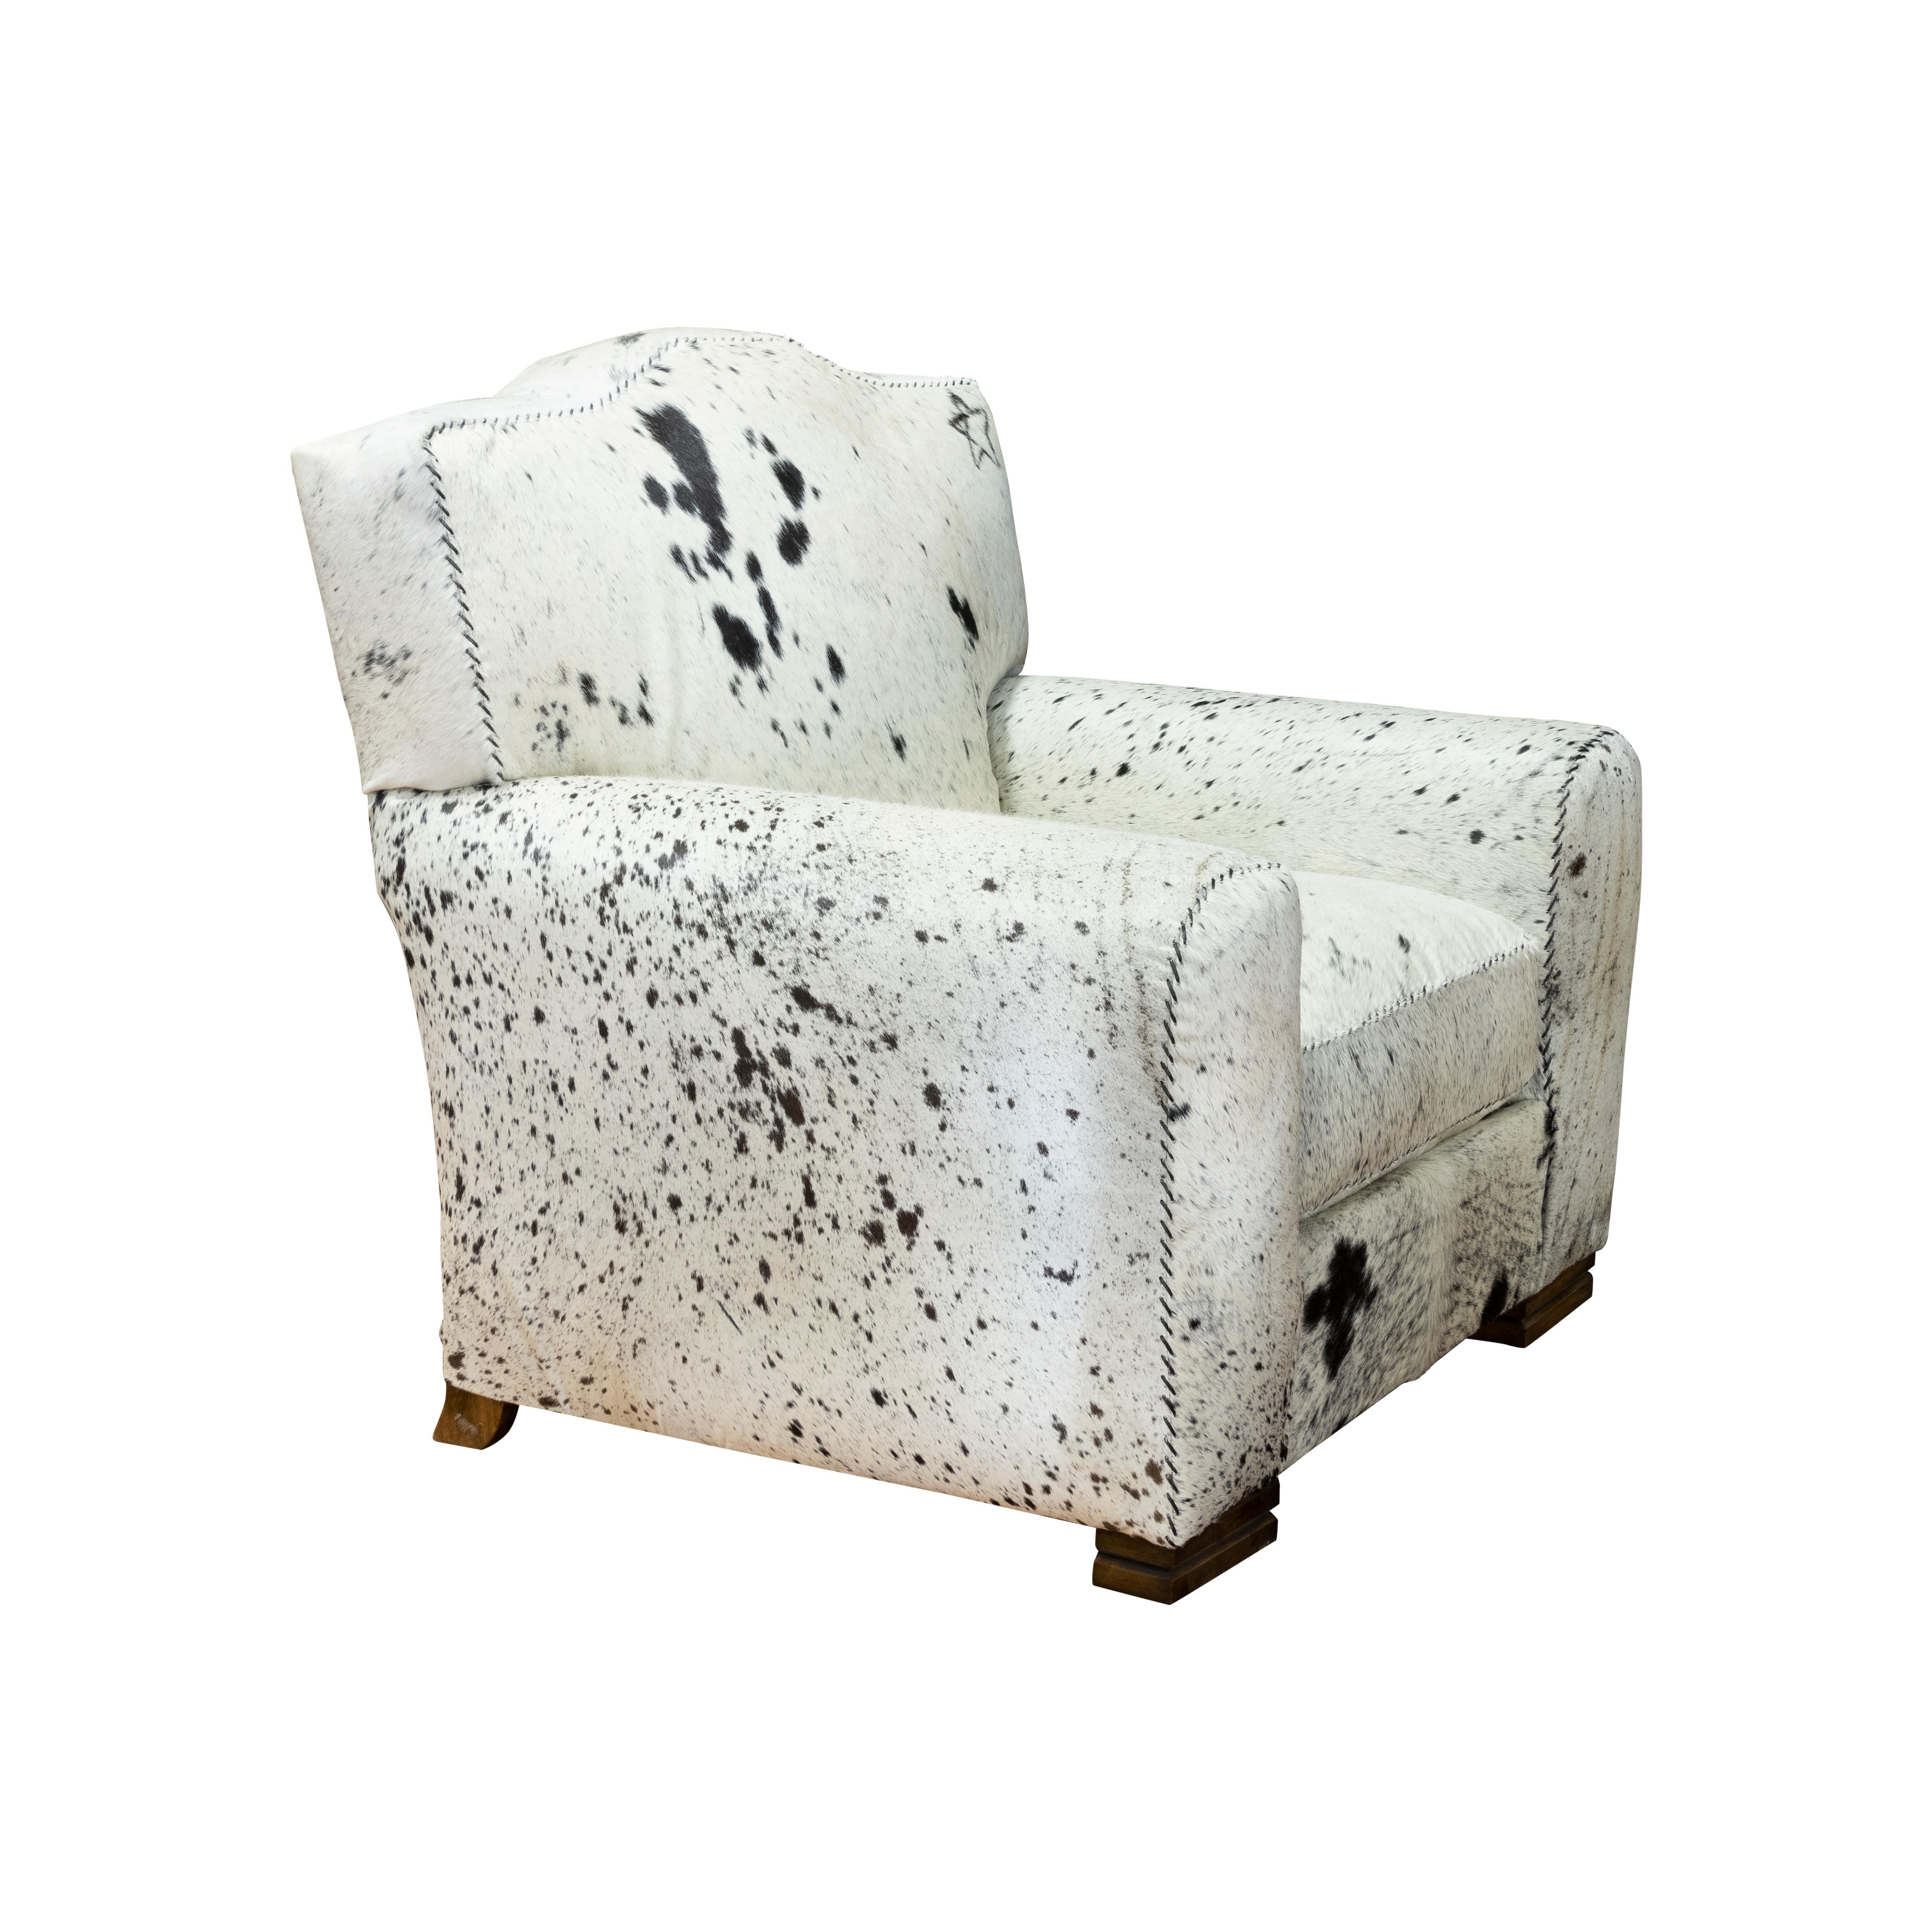 Longhorn Hide Chair and Ottoman In New Condition For Sale In Coeur d'Alene, ID